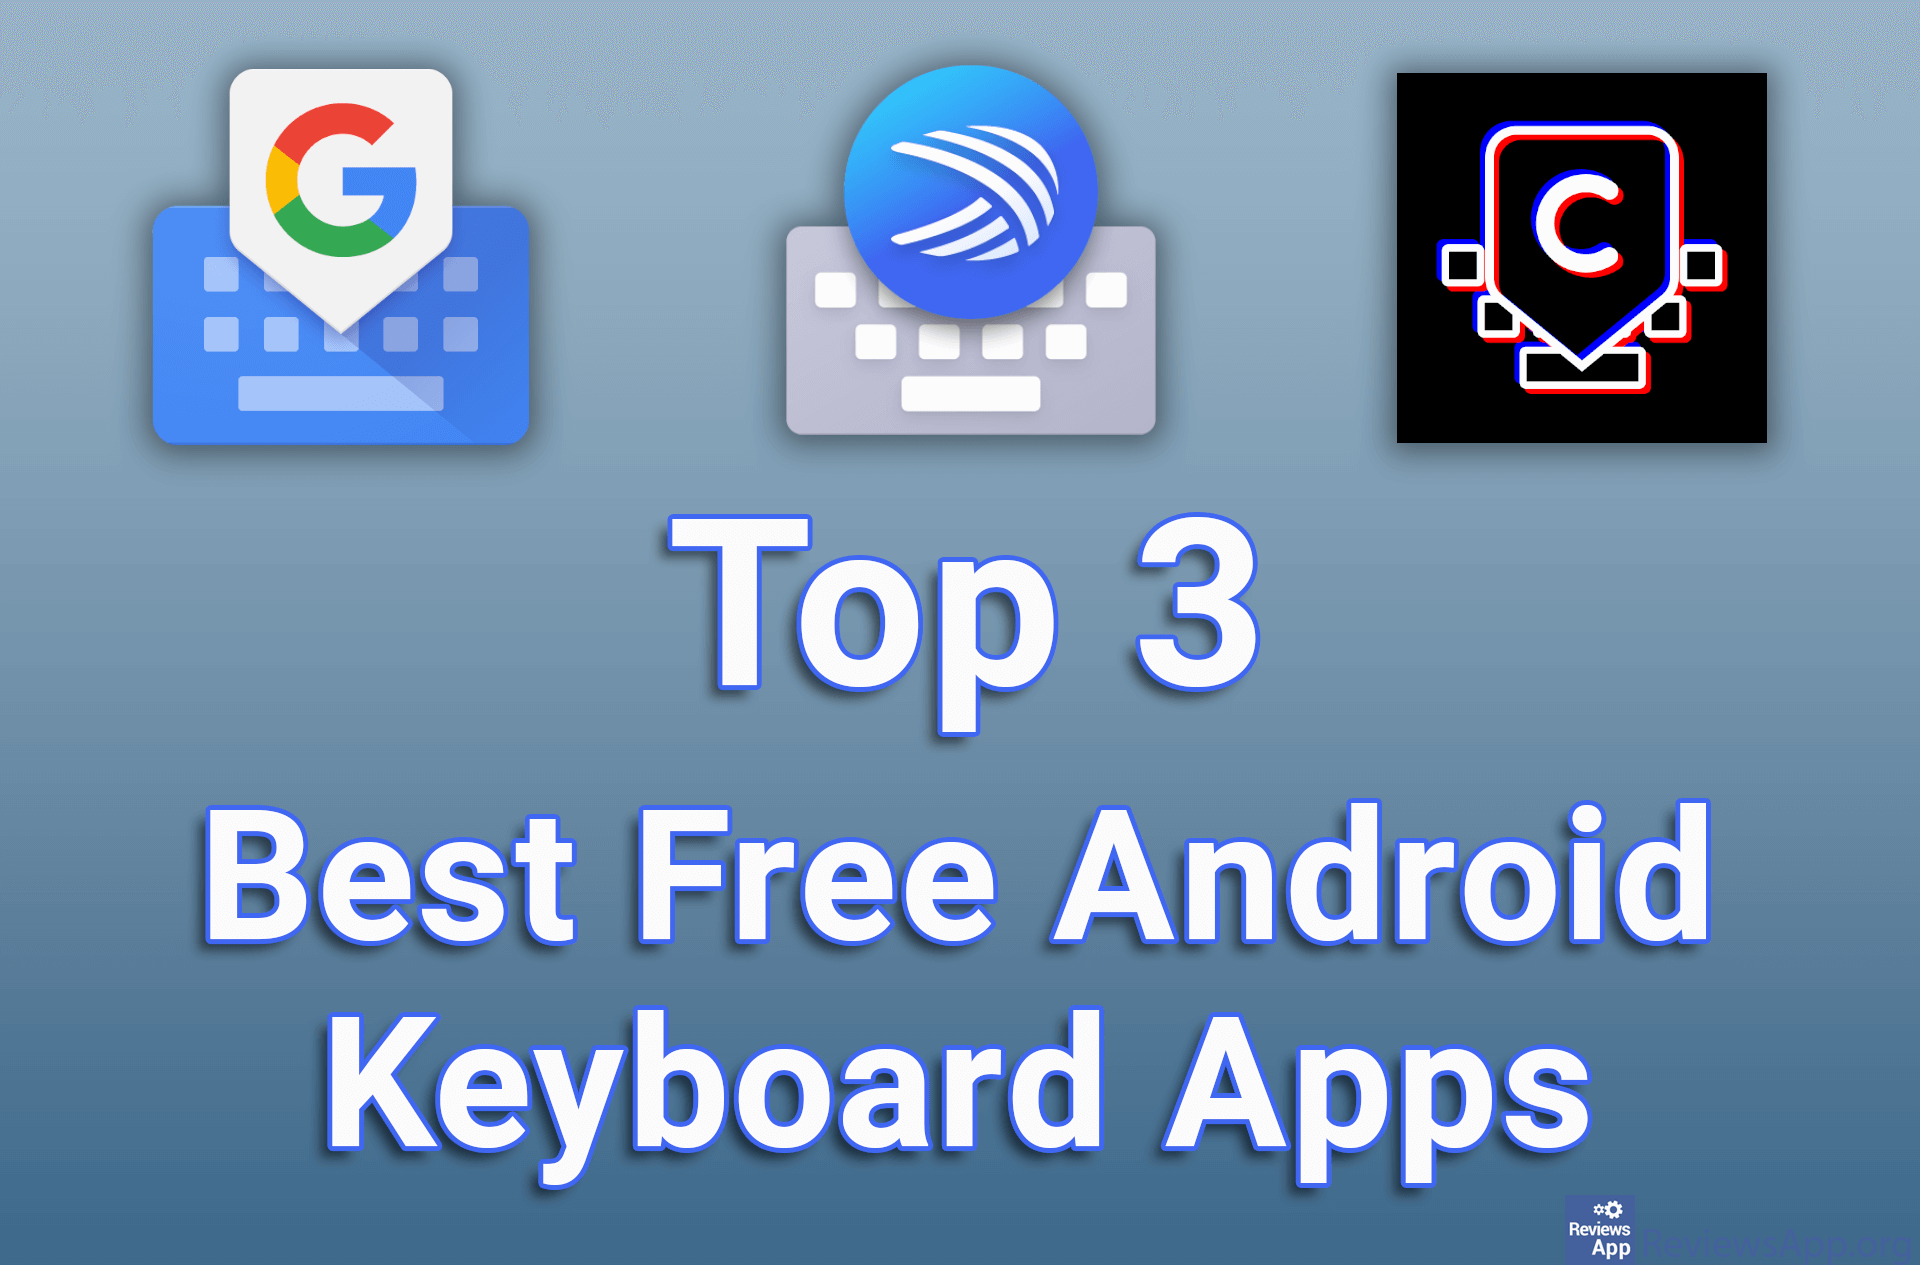 Top 3 Best Free Android Keyboard Apps